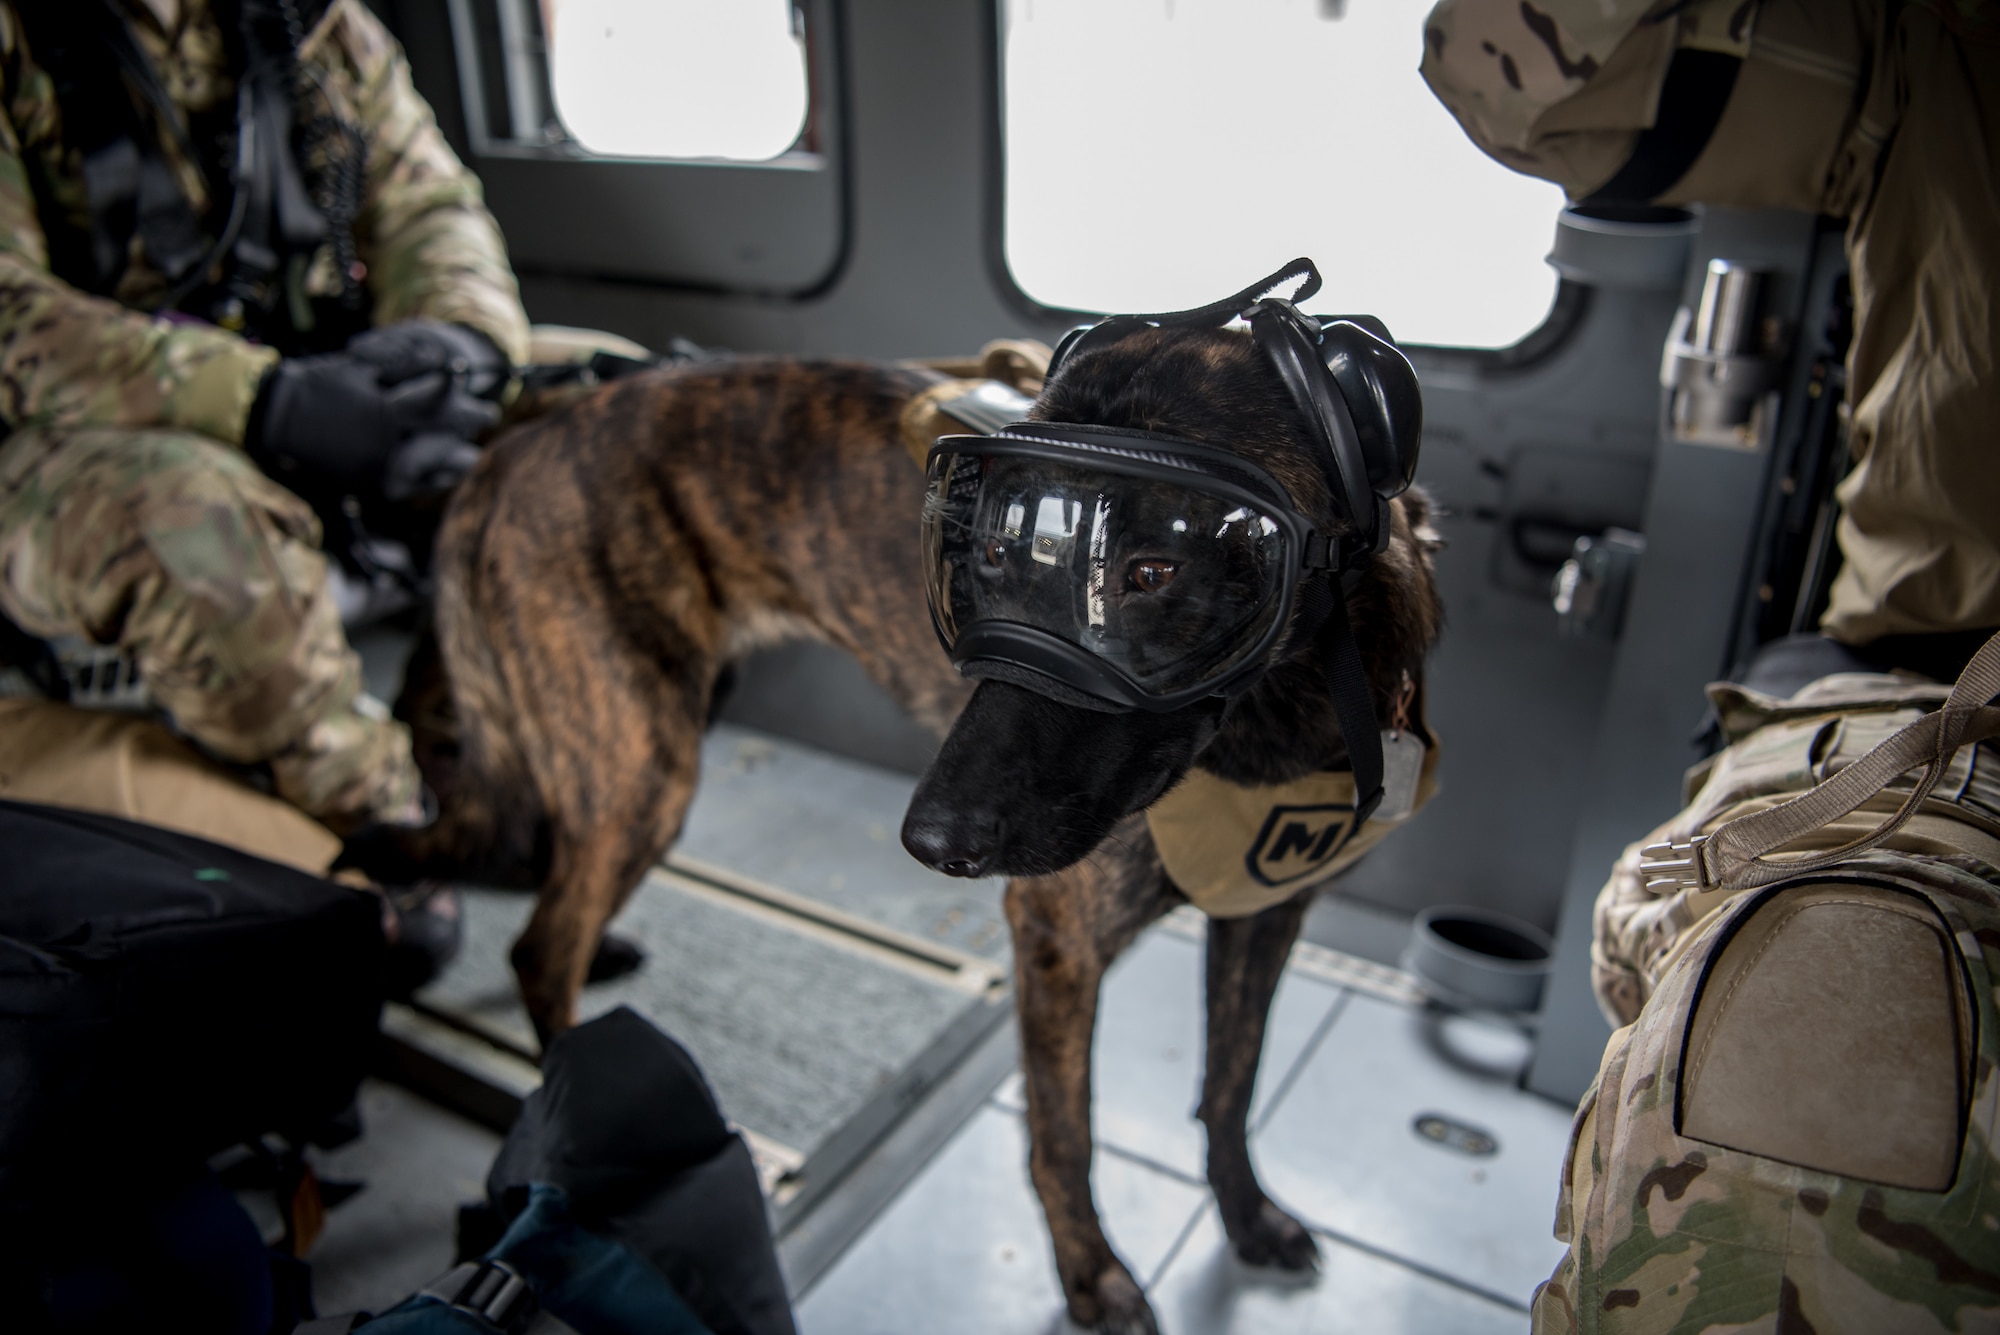 Callie, a search and rescue dog for the Kentucky Air National Guard’s 123rd Special Tactics Squadron, rides in a UH-60 Black Hawk helicopter as part of her familiarization training at the Boone National Guard Center in Frankfort, Ky., Nov. 29, 2018. Callie is currently the only search and rescue dog in the Department of Defense. (U.S. Air National Guard photo by Staff Sgt. Joshua Horton)